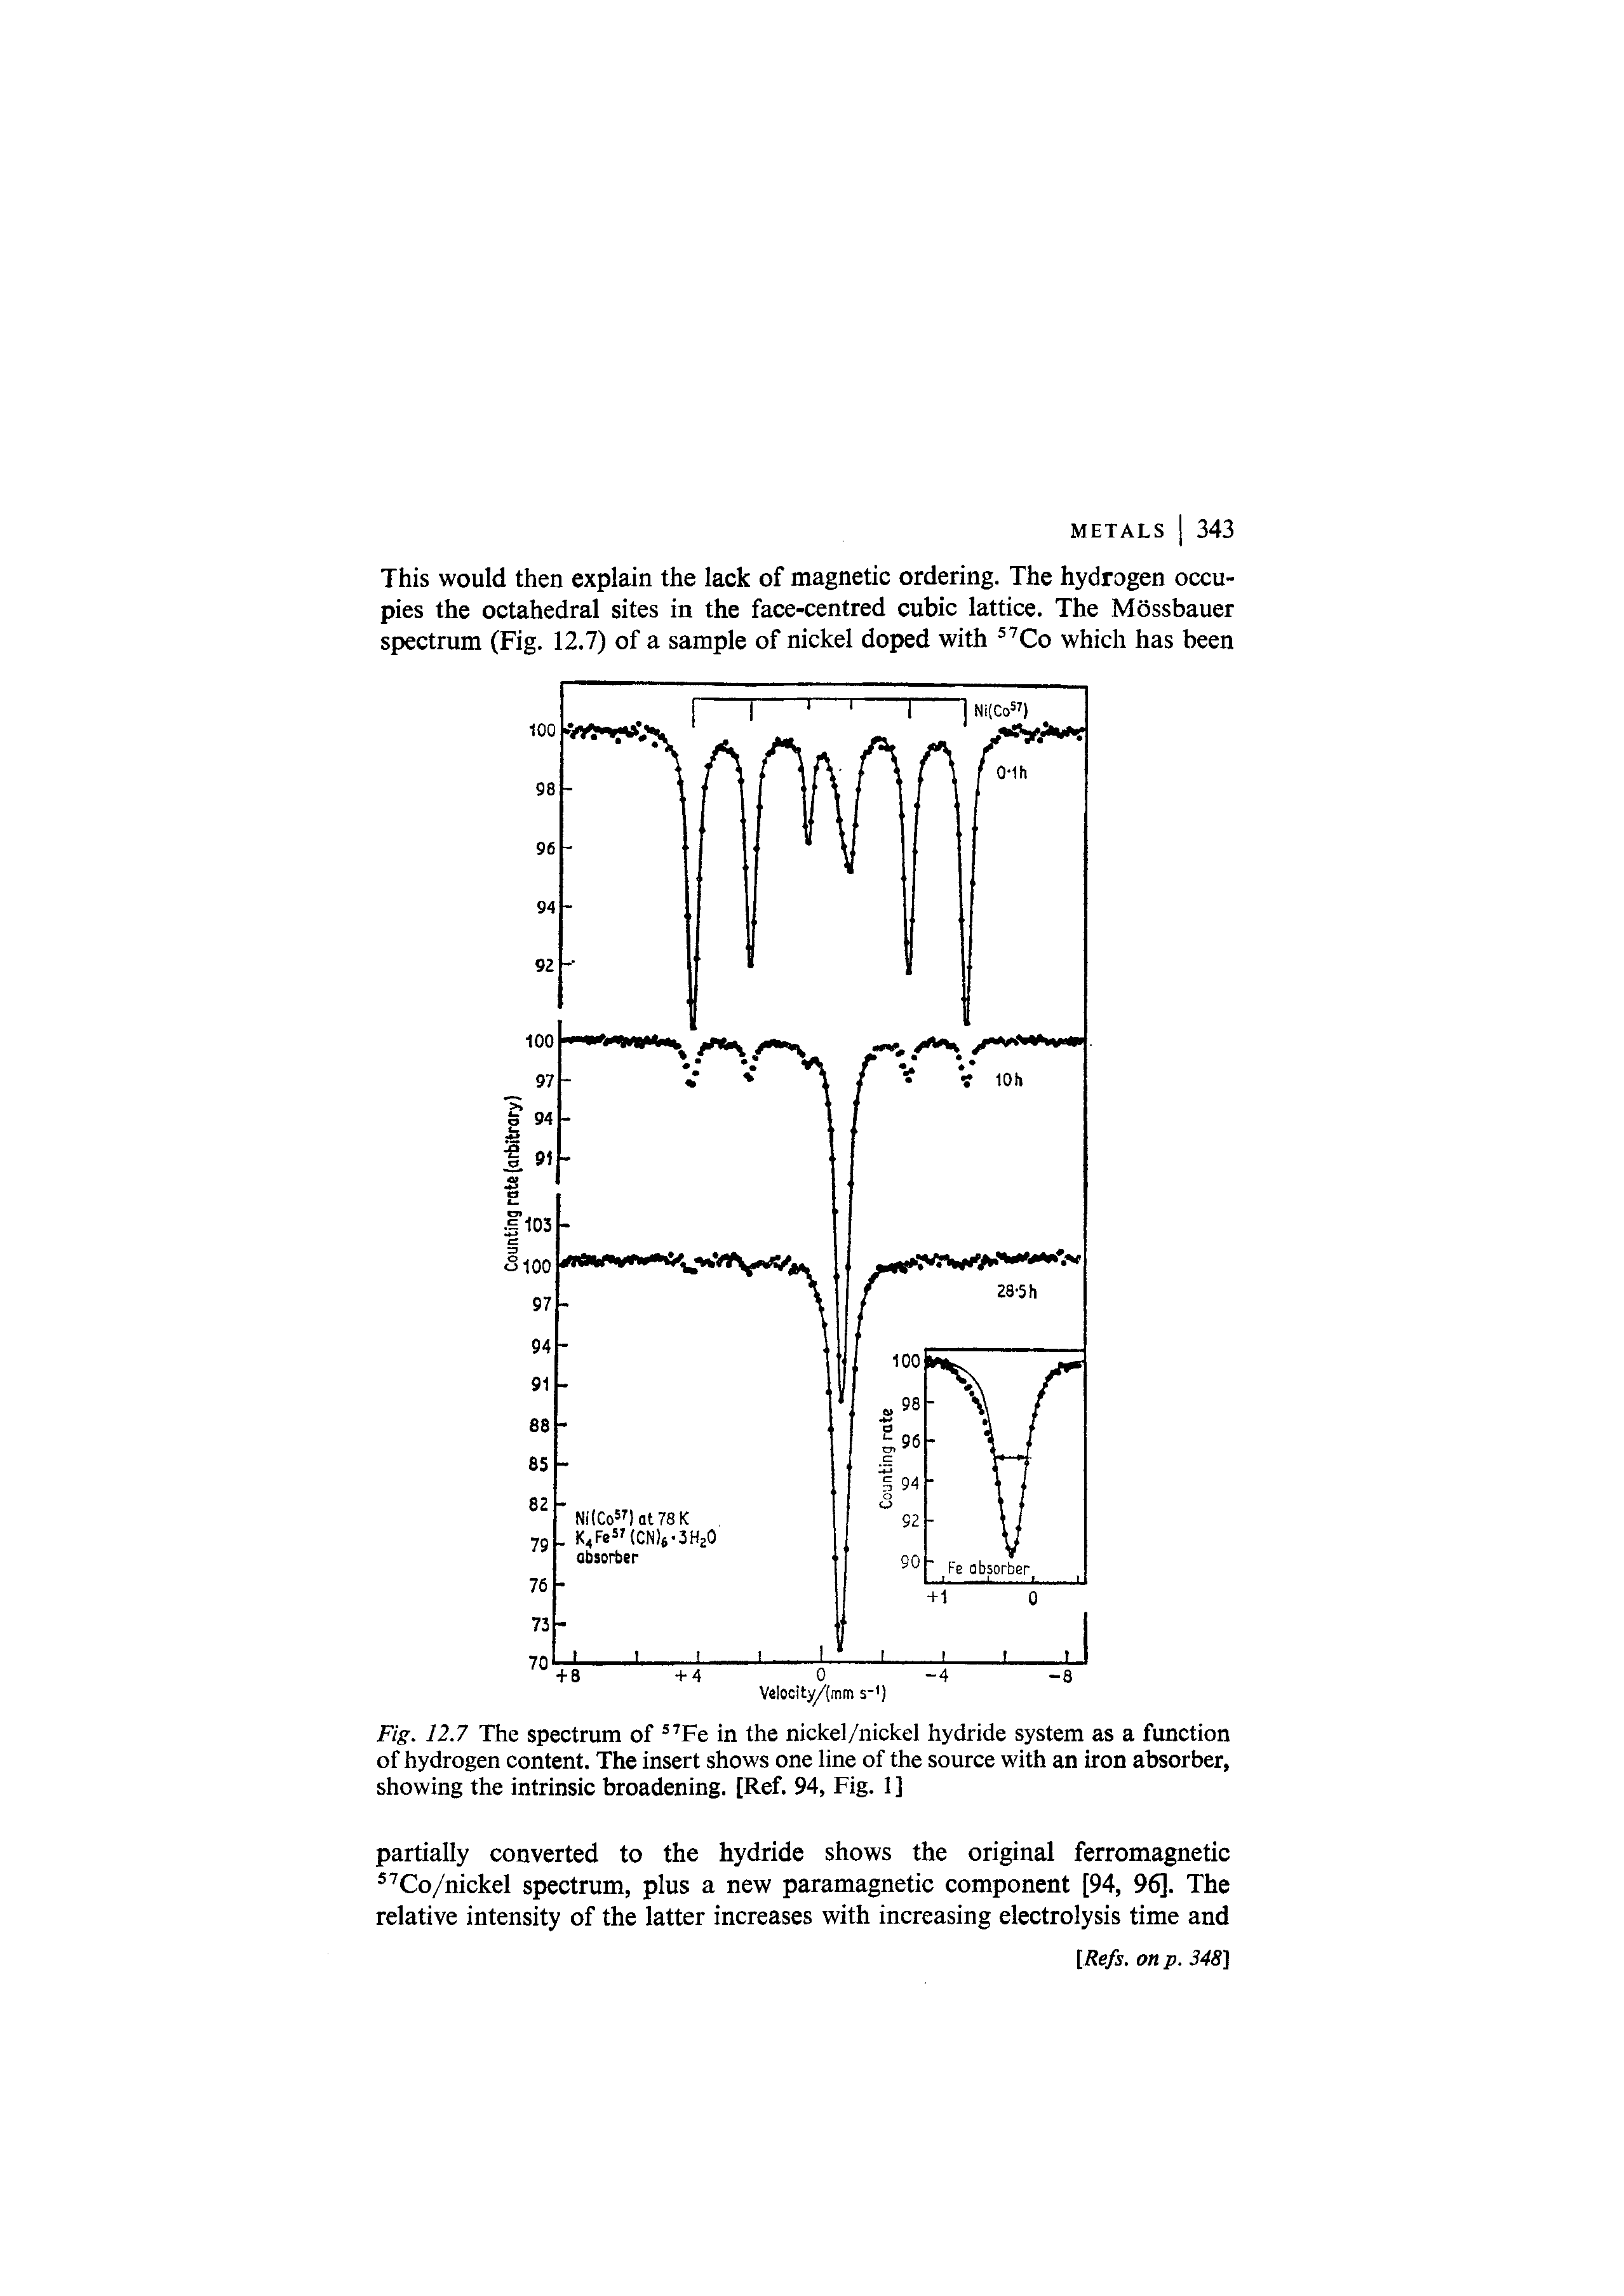 Fig. 12.7 The spectrum of Fe in the nickel/nickel hydride system as a function of hydrogen content. The insert shows one line of the source with an iron absorber, showing the intrinsic broadening. [Ref. 94, Fig. 1 ]...